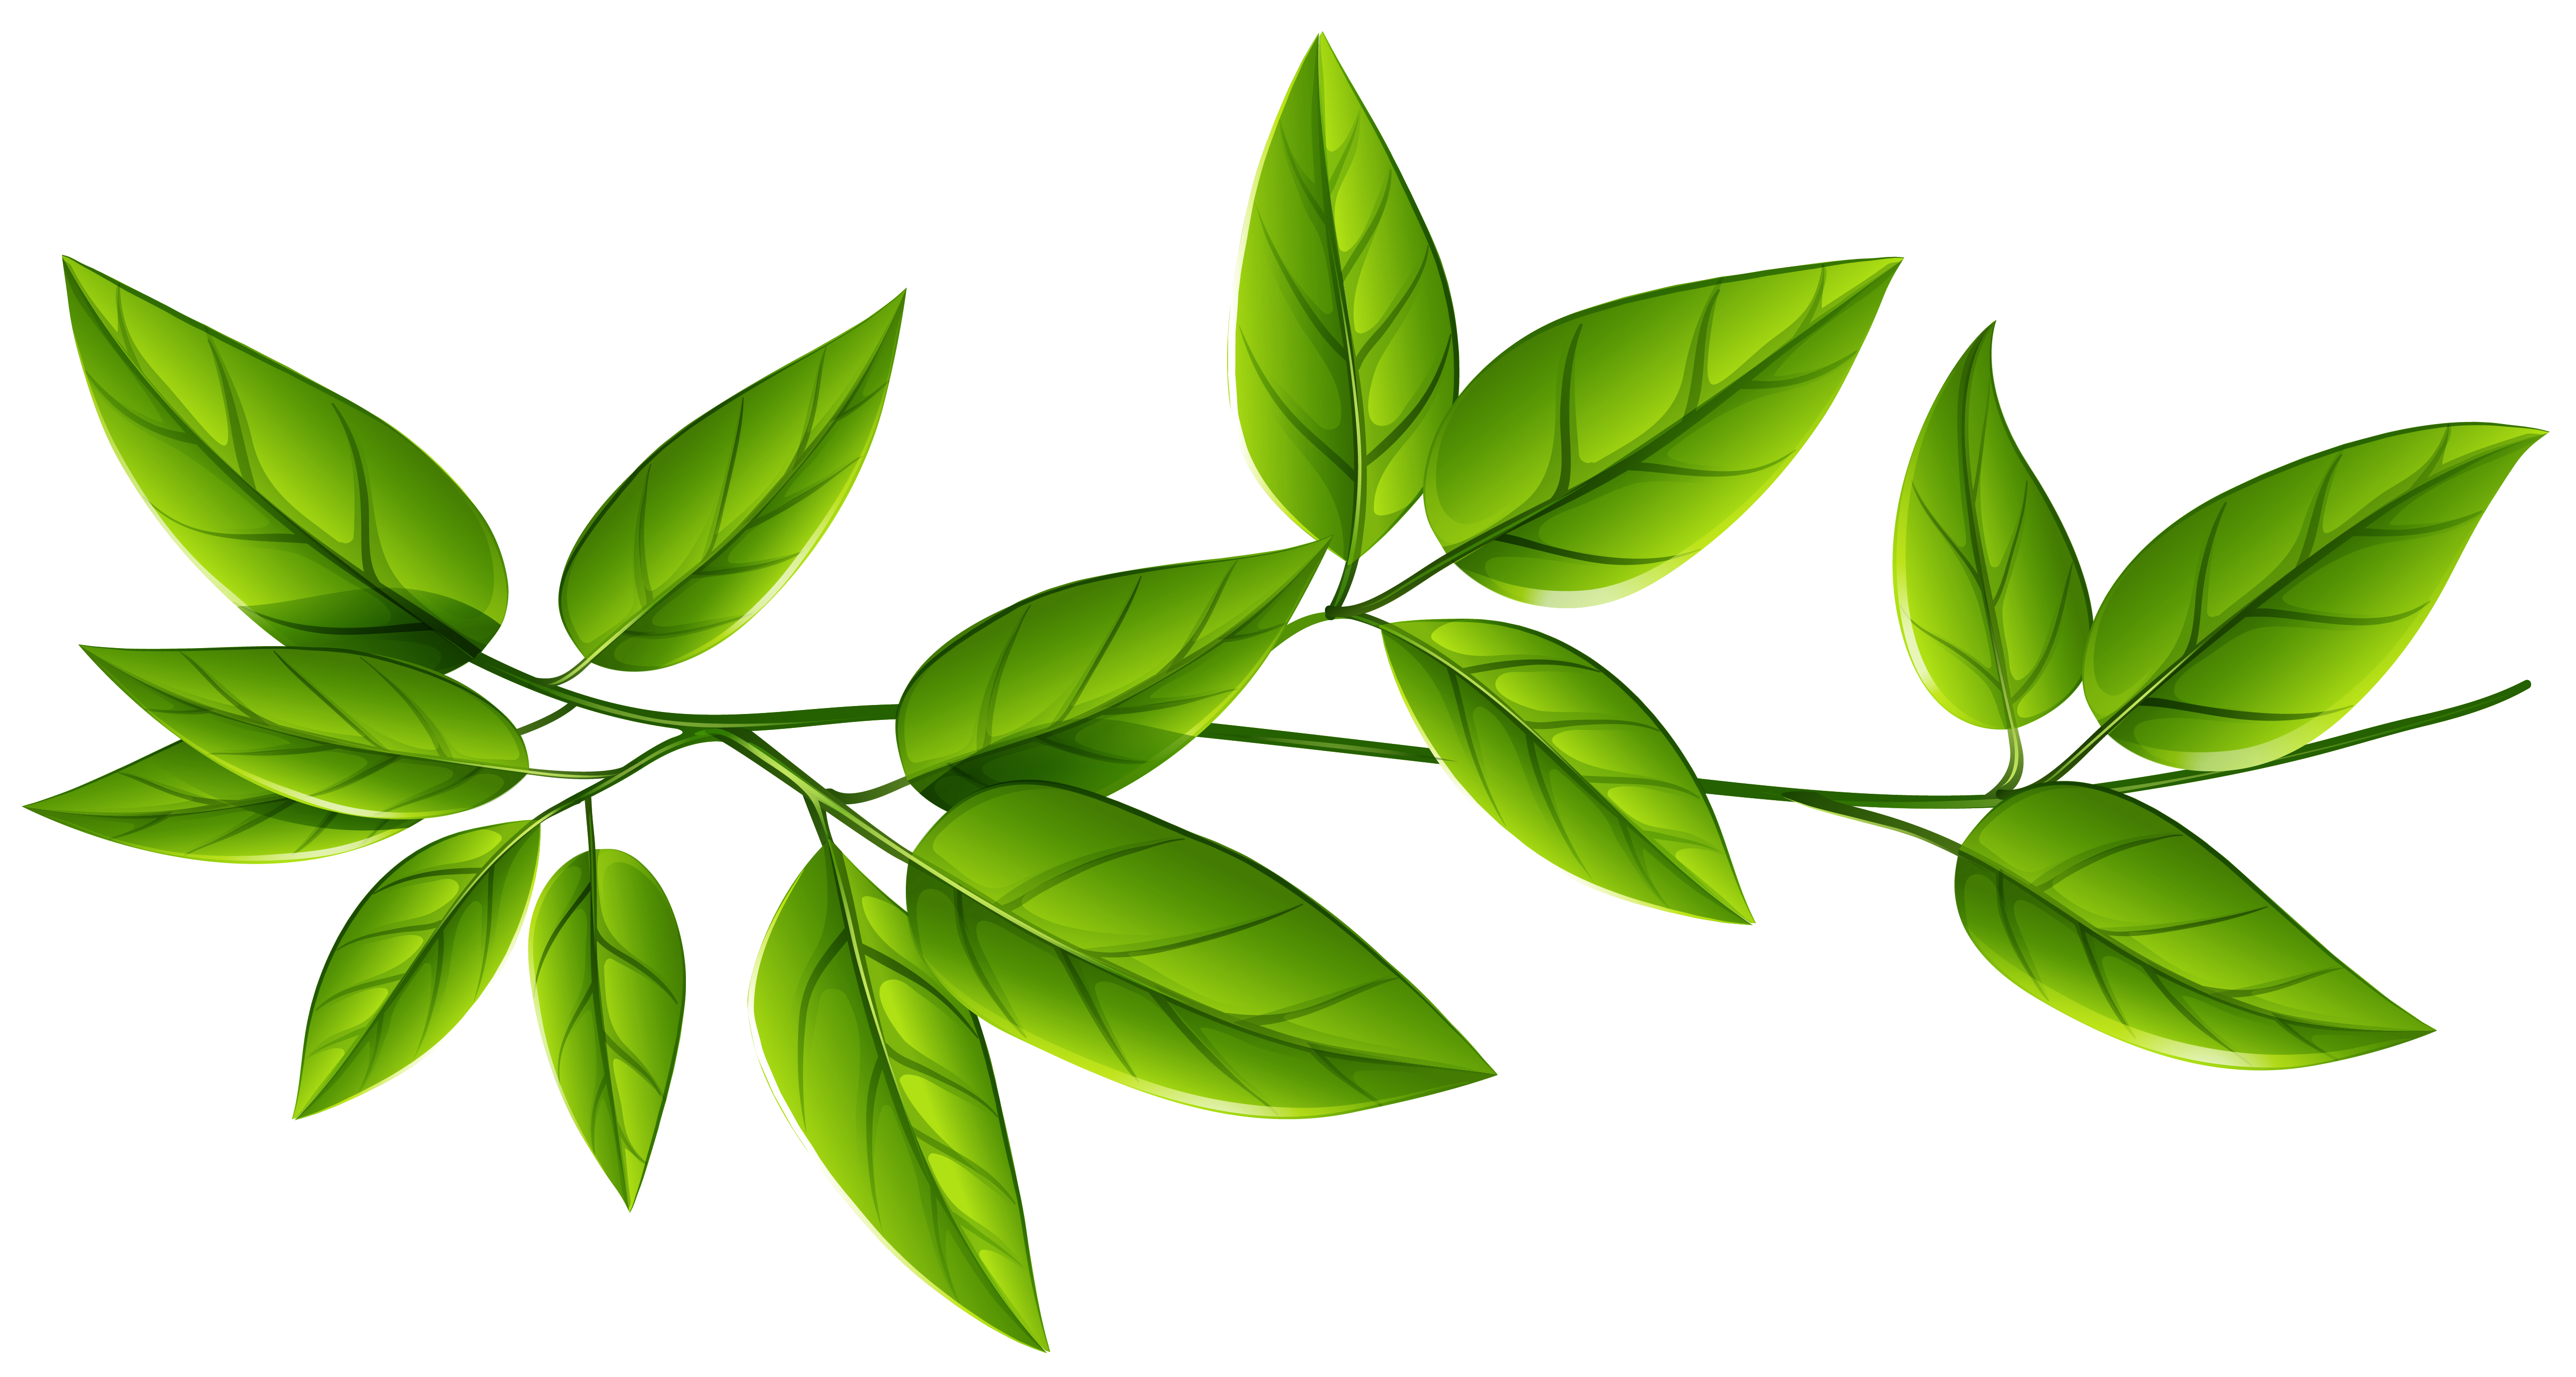 Green Leaves Png Image Gallery Yopriceville High Quality Images And Transparent Png Free Clipart